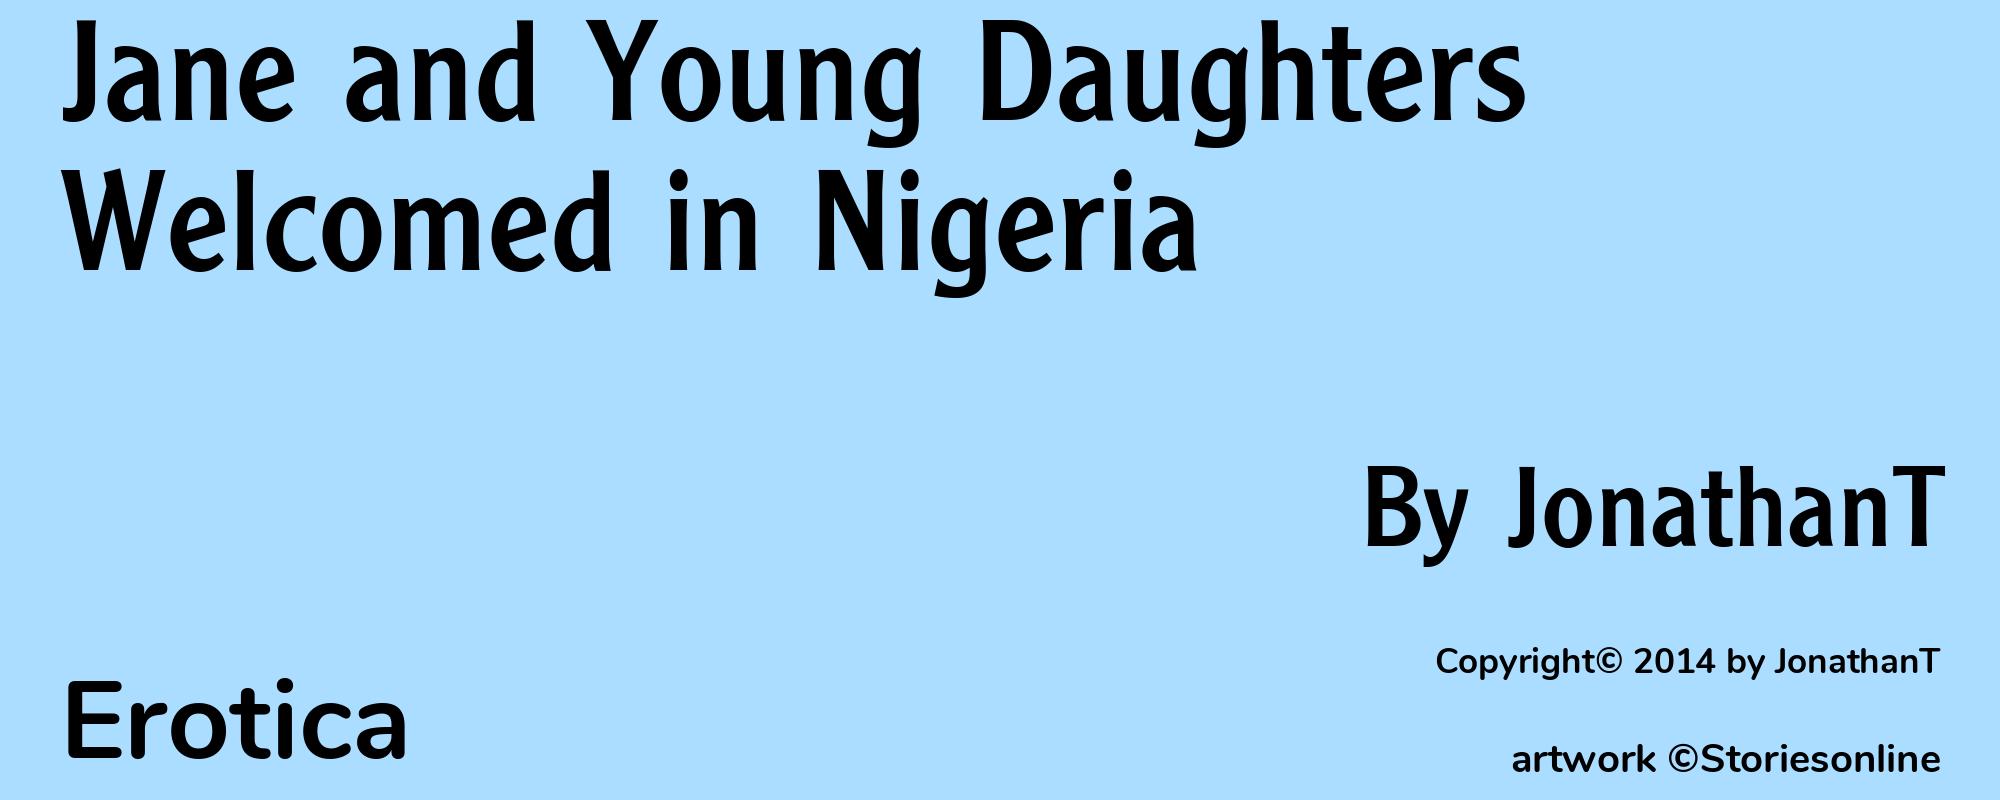 Jane and Young Daughters Welcomed in Nigeria - Cover